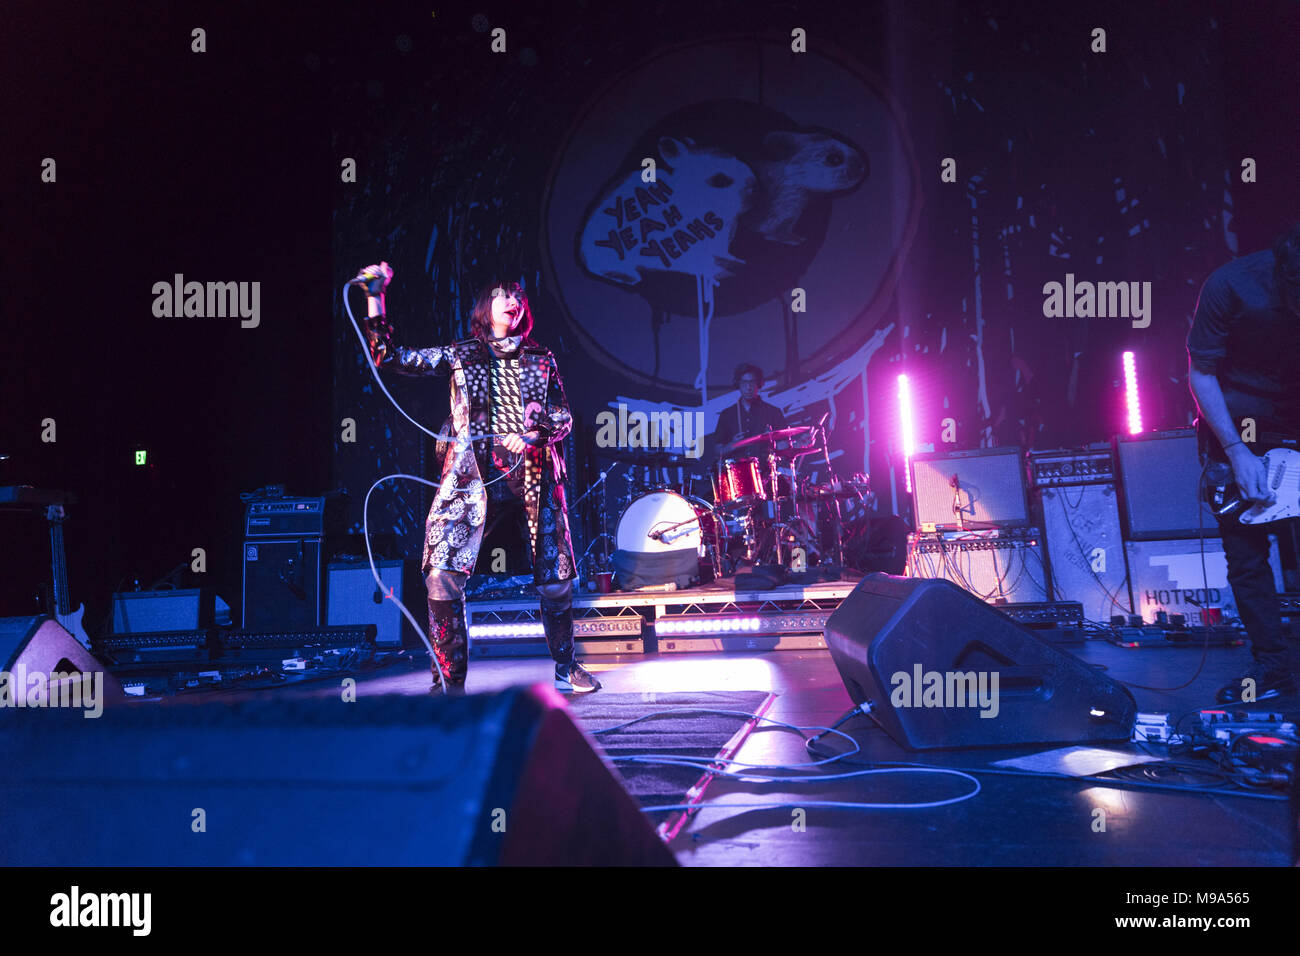 October 25, 2017 - THE YEAH YEAH YEAHS perform at the Fonda Theatre in Hollywood, CA, celebrating the reissue of their record Fever To Tell (Credit Image: © Greg Chow via ZUMA Wire) Stock Photo